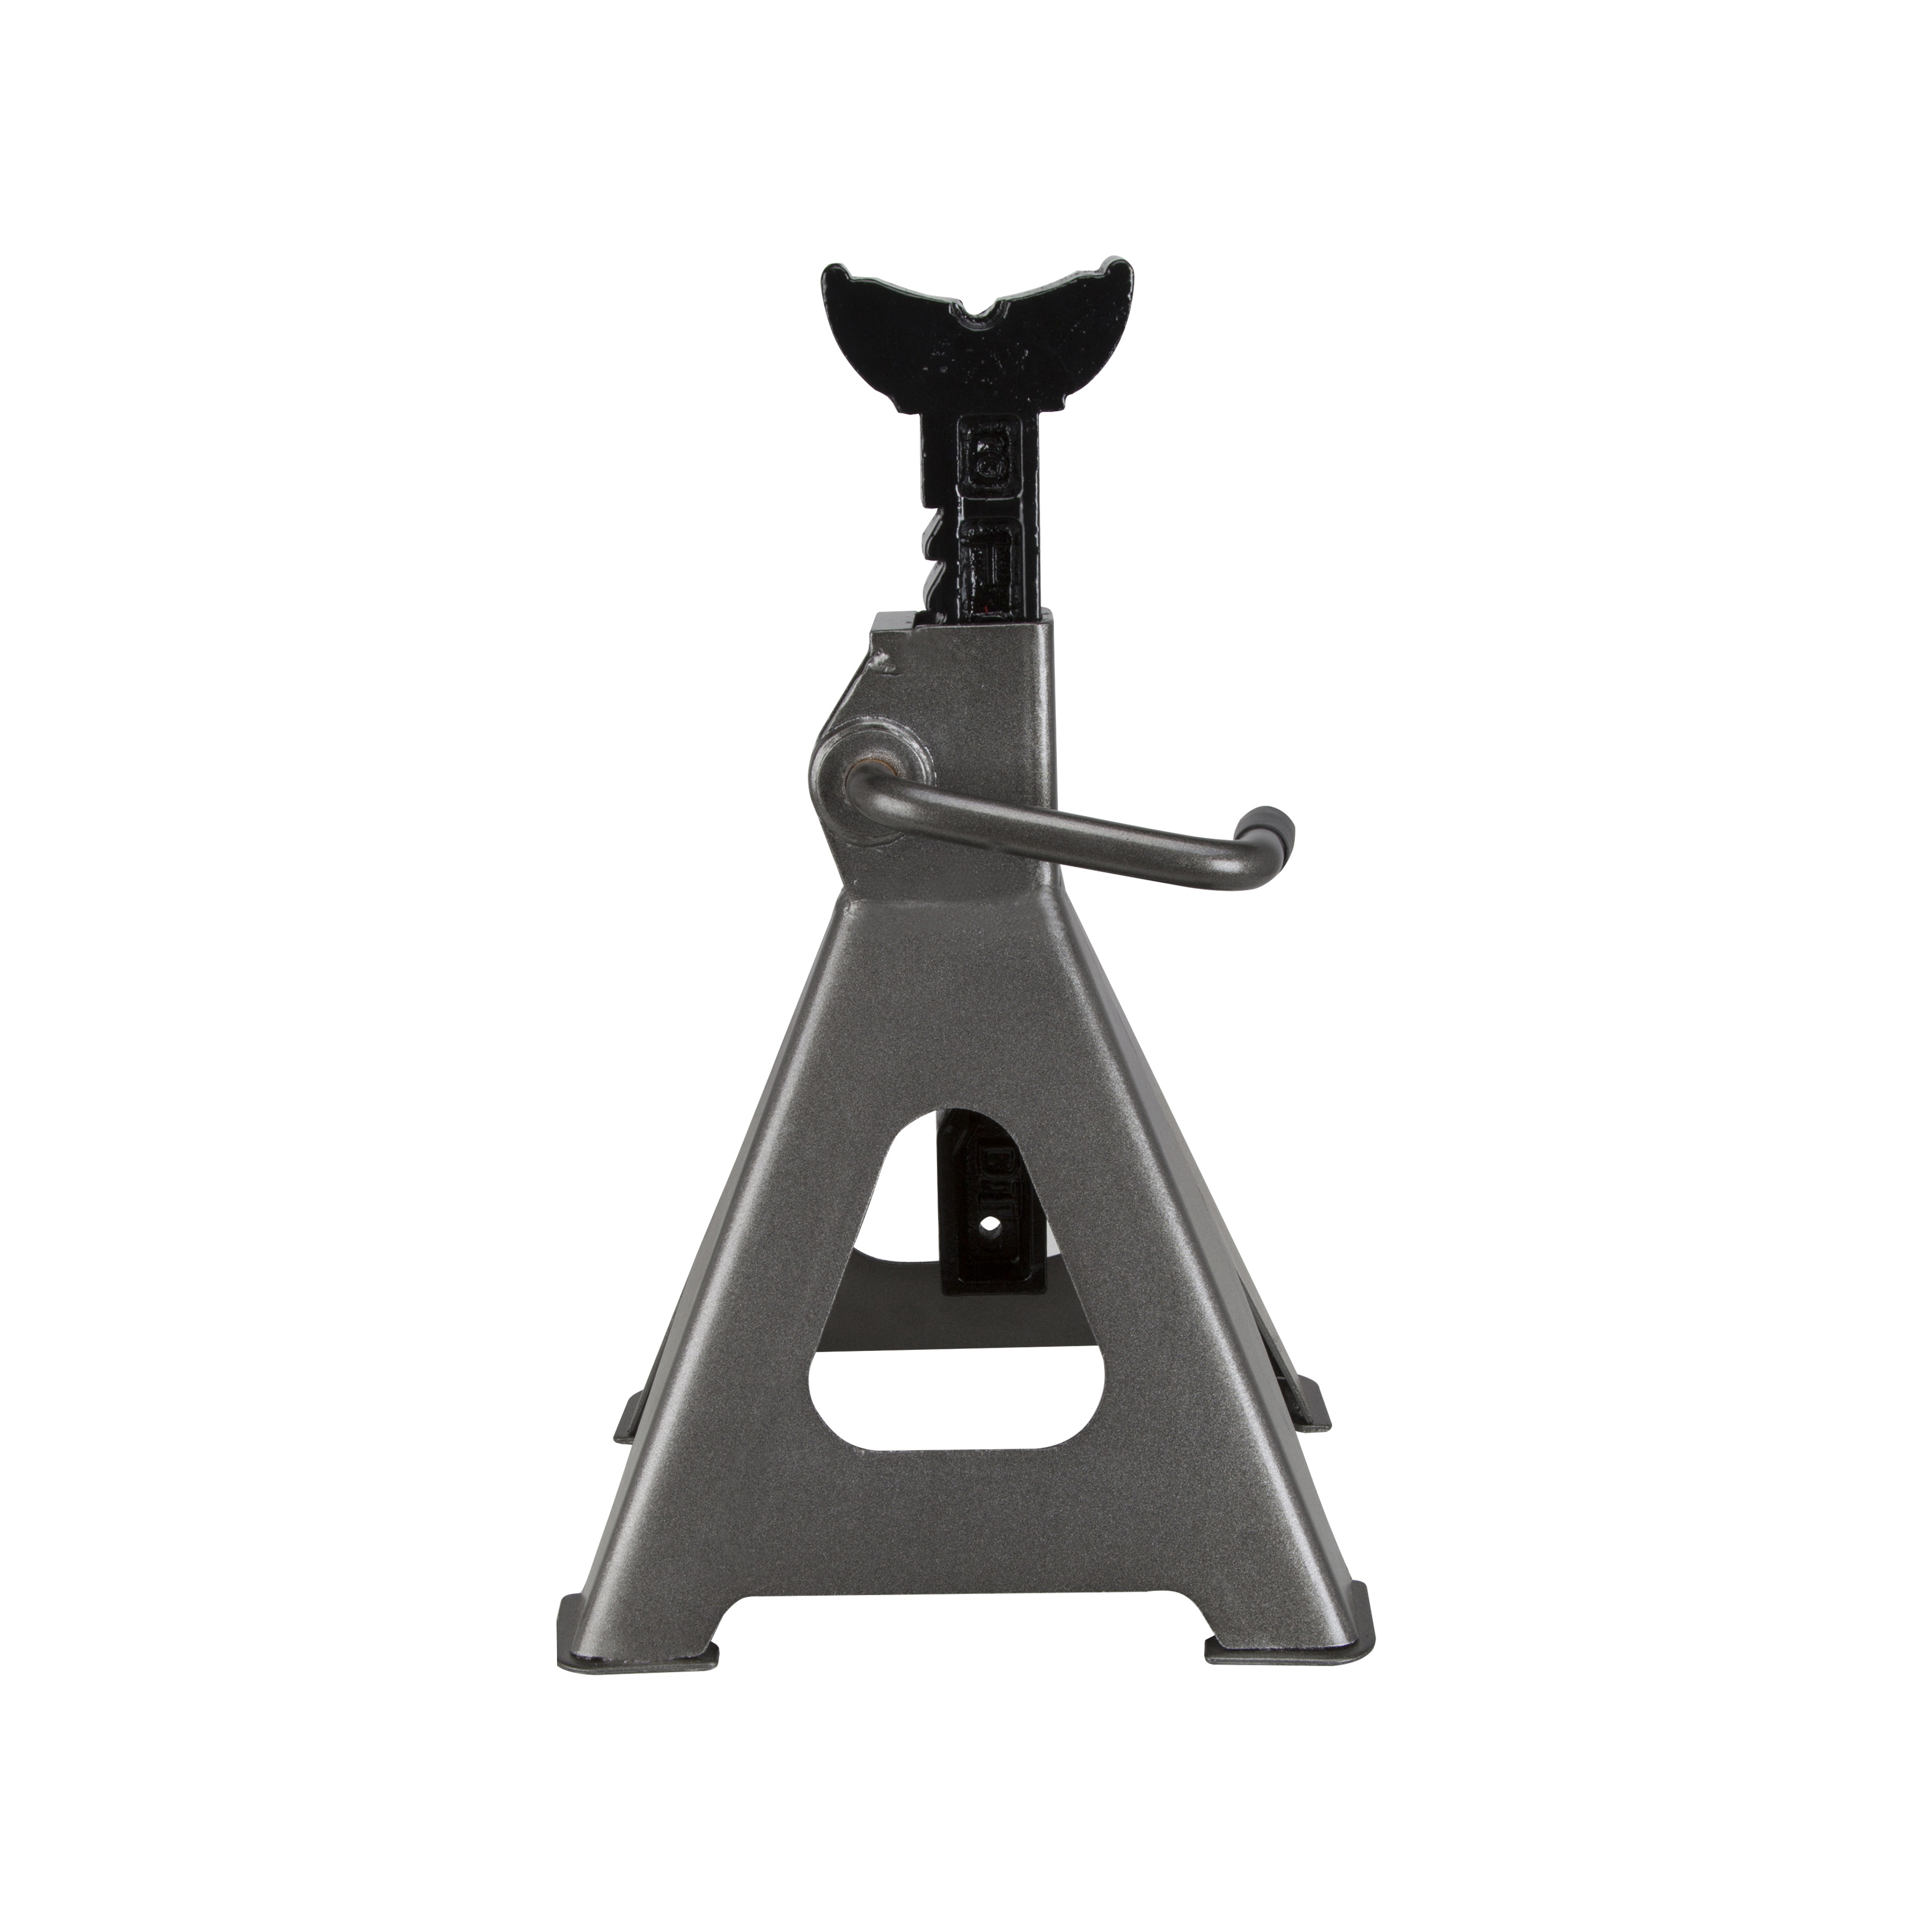 T210105 Jack Stand, 6 ton, 15-1/2 to 24-1/2 in Lift, Steel, Gray